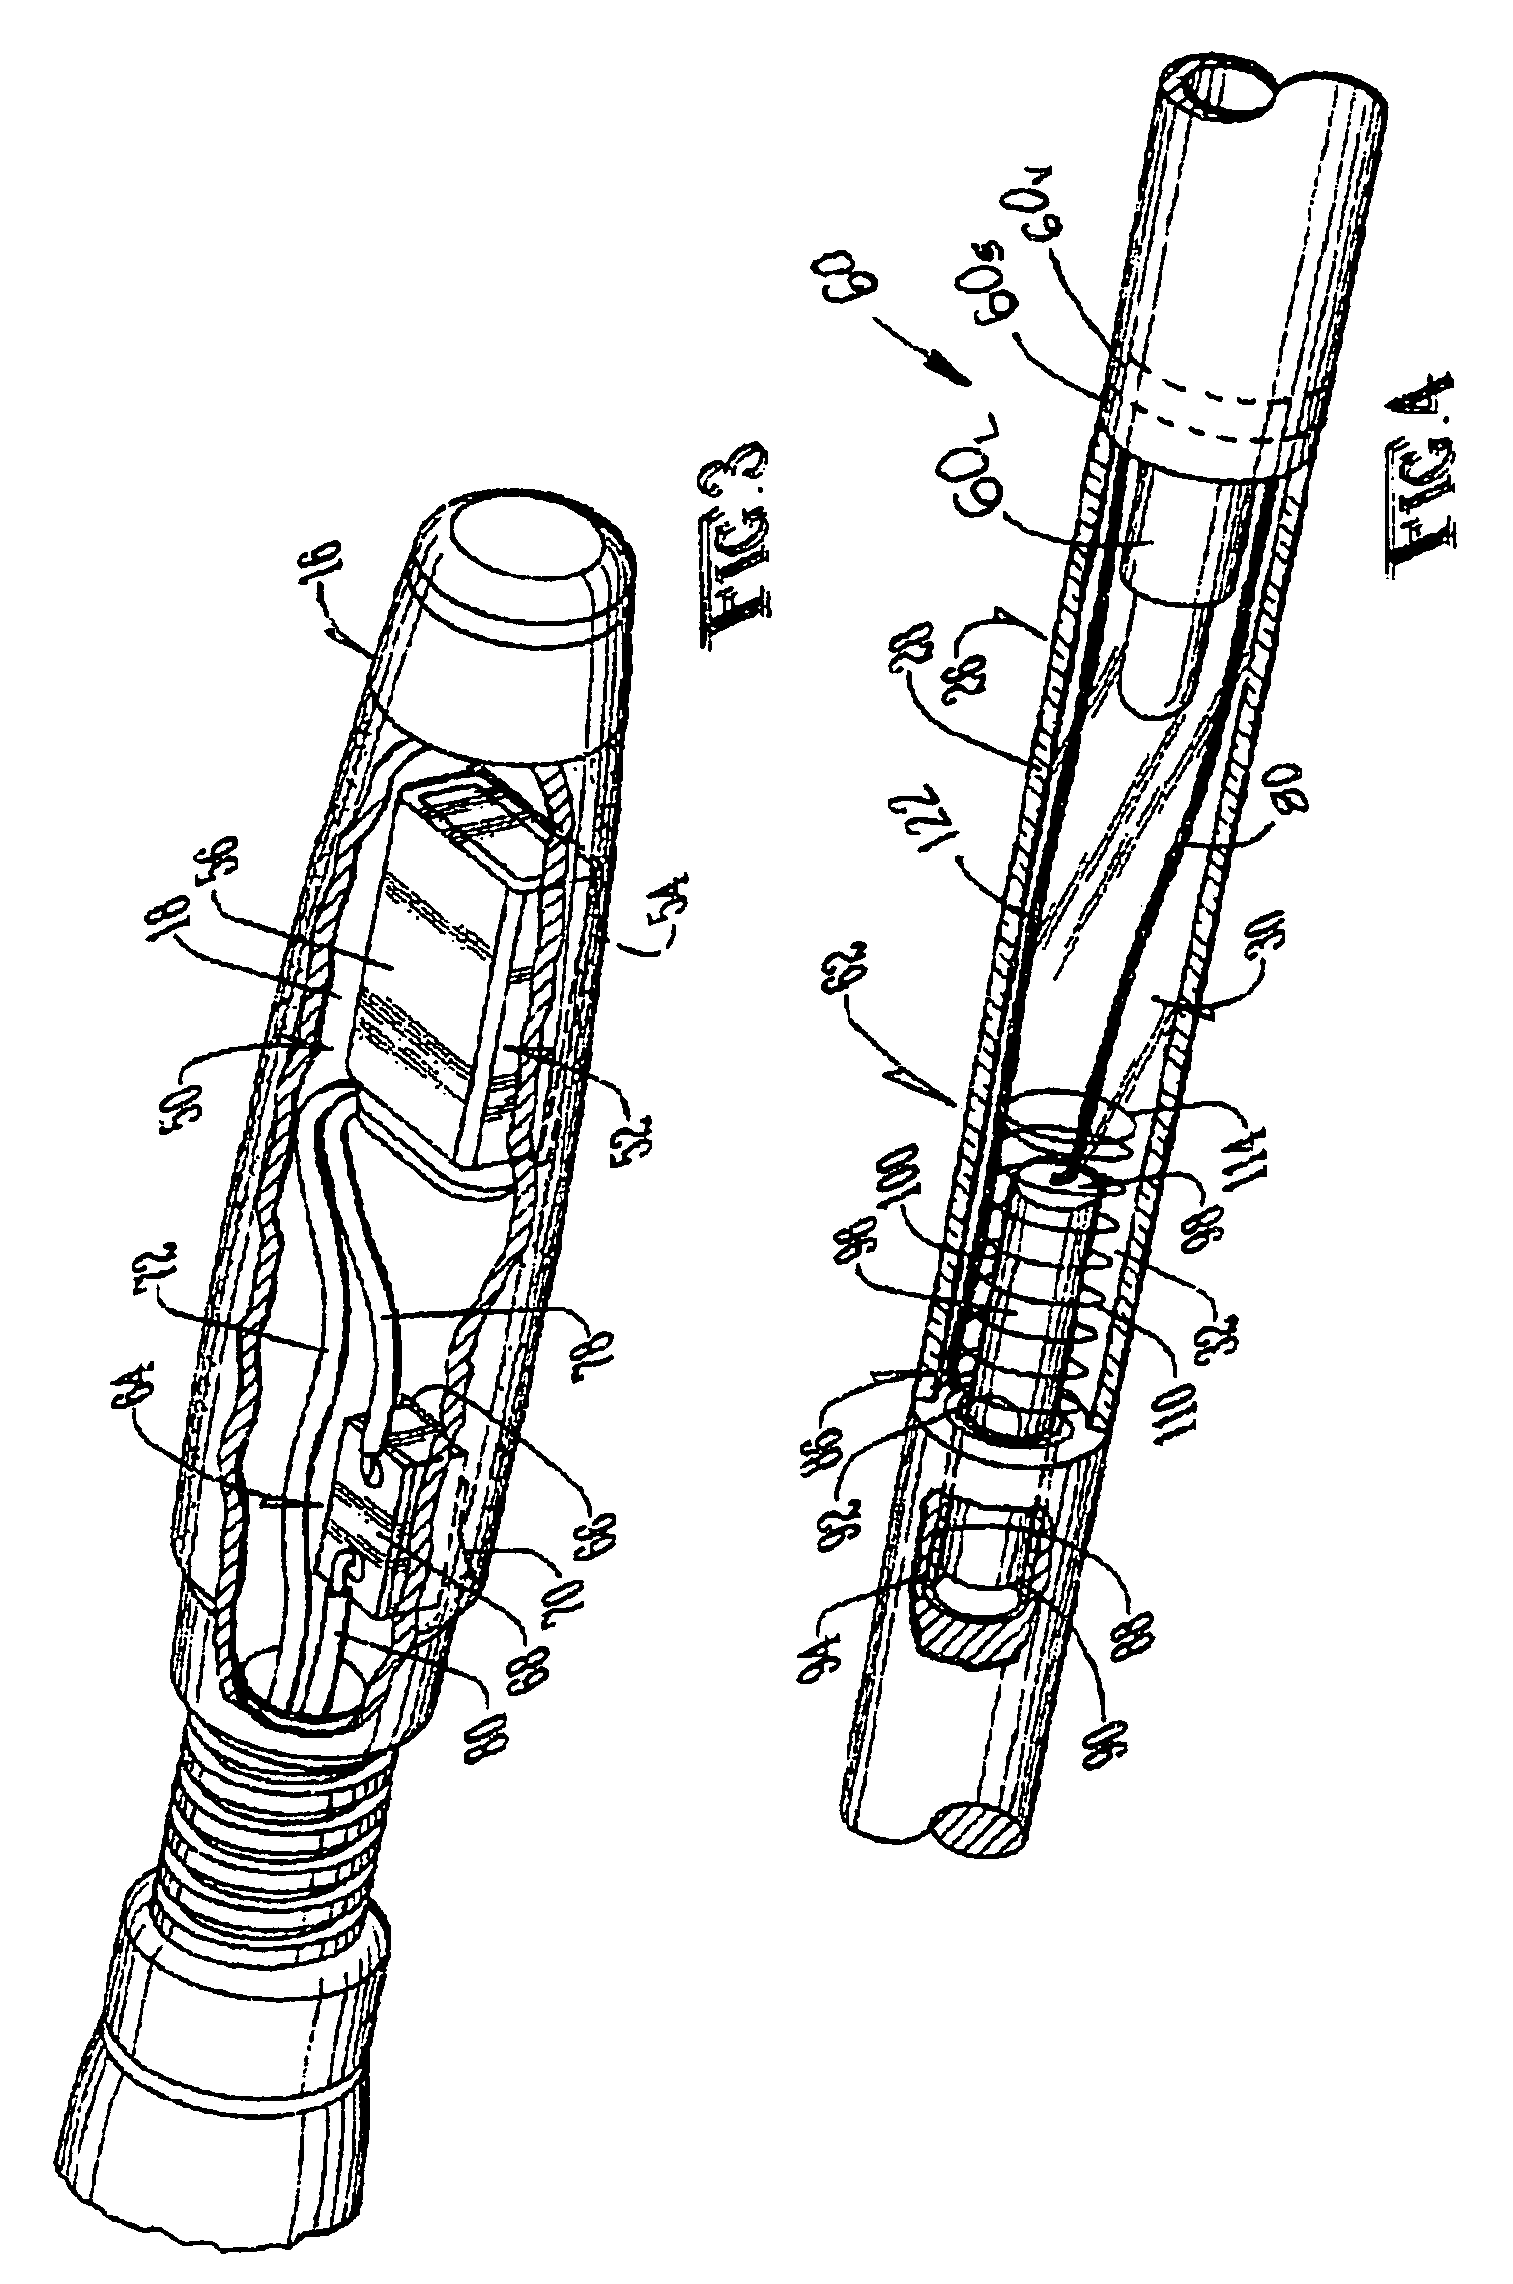 Fishing rod with signal devices activated by fish-bite flexing of the fishing rod